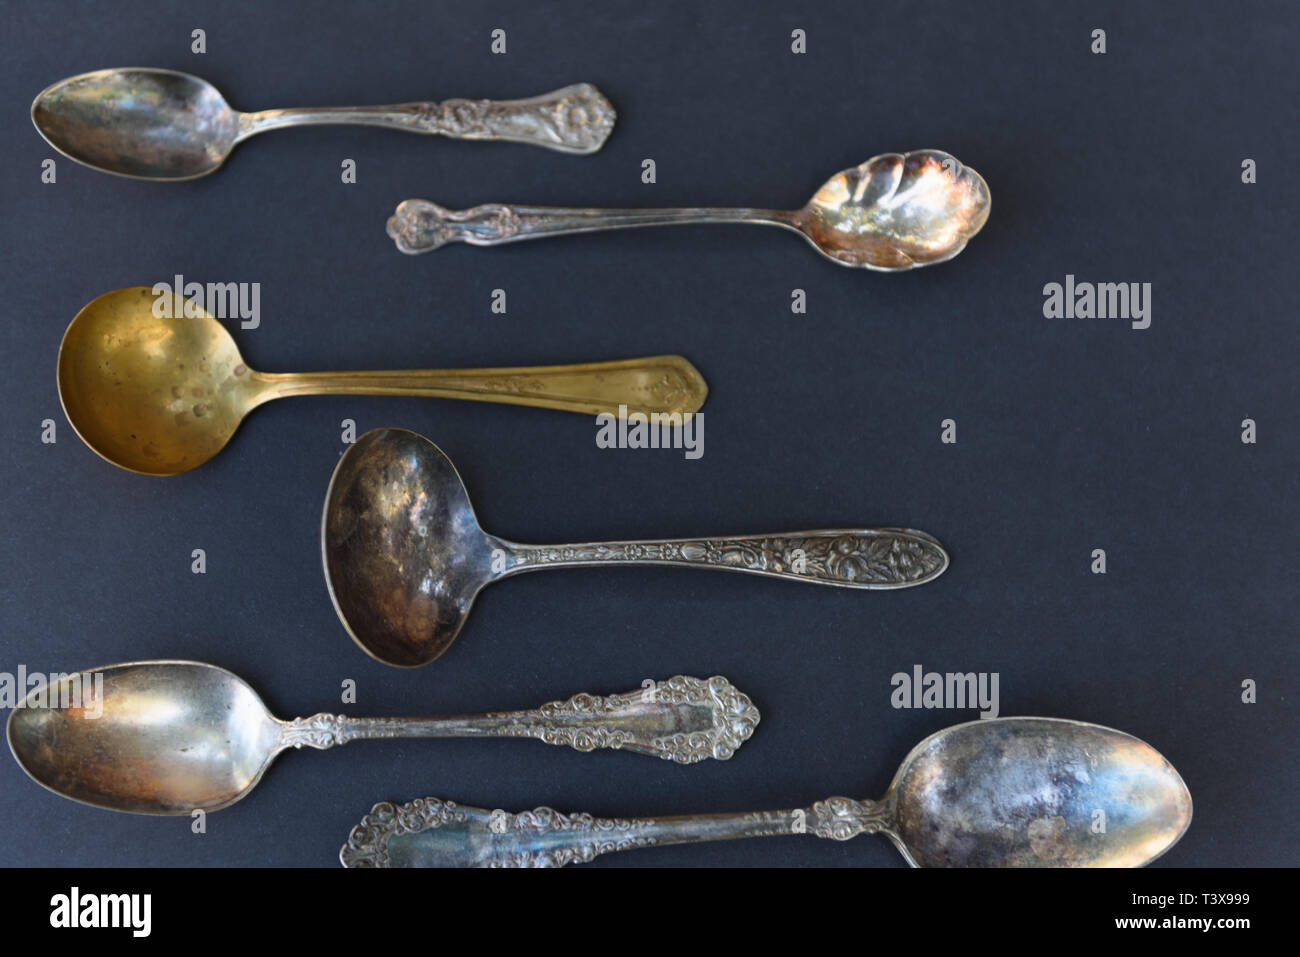 Weathered silverware of multiple sizes and patterns are arranged against a black background. Stock Photo